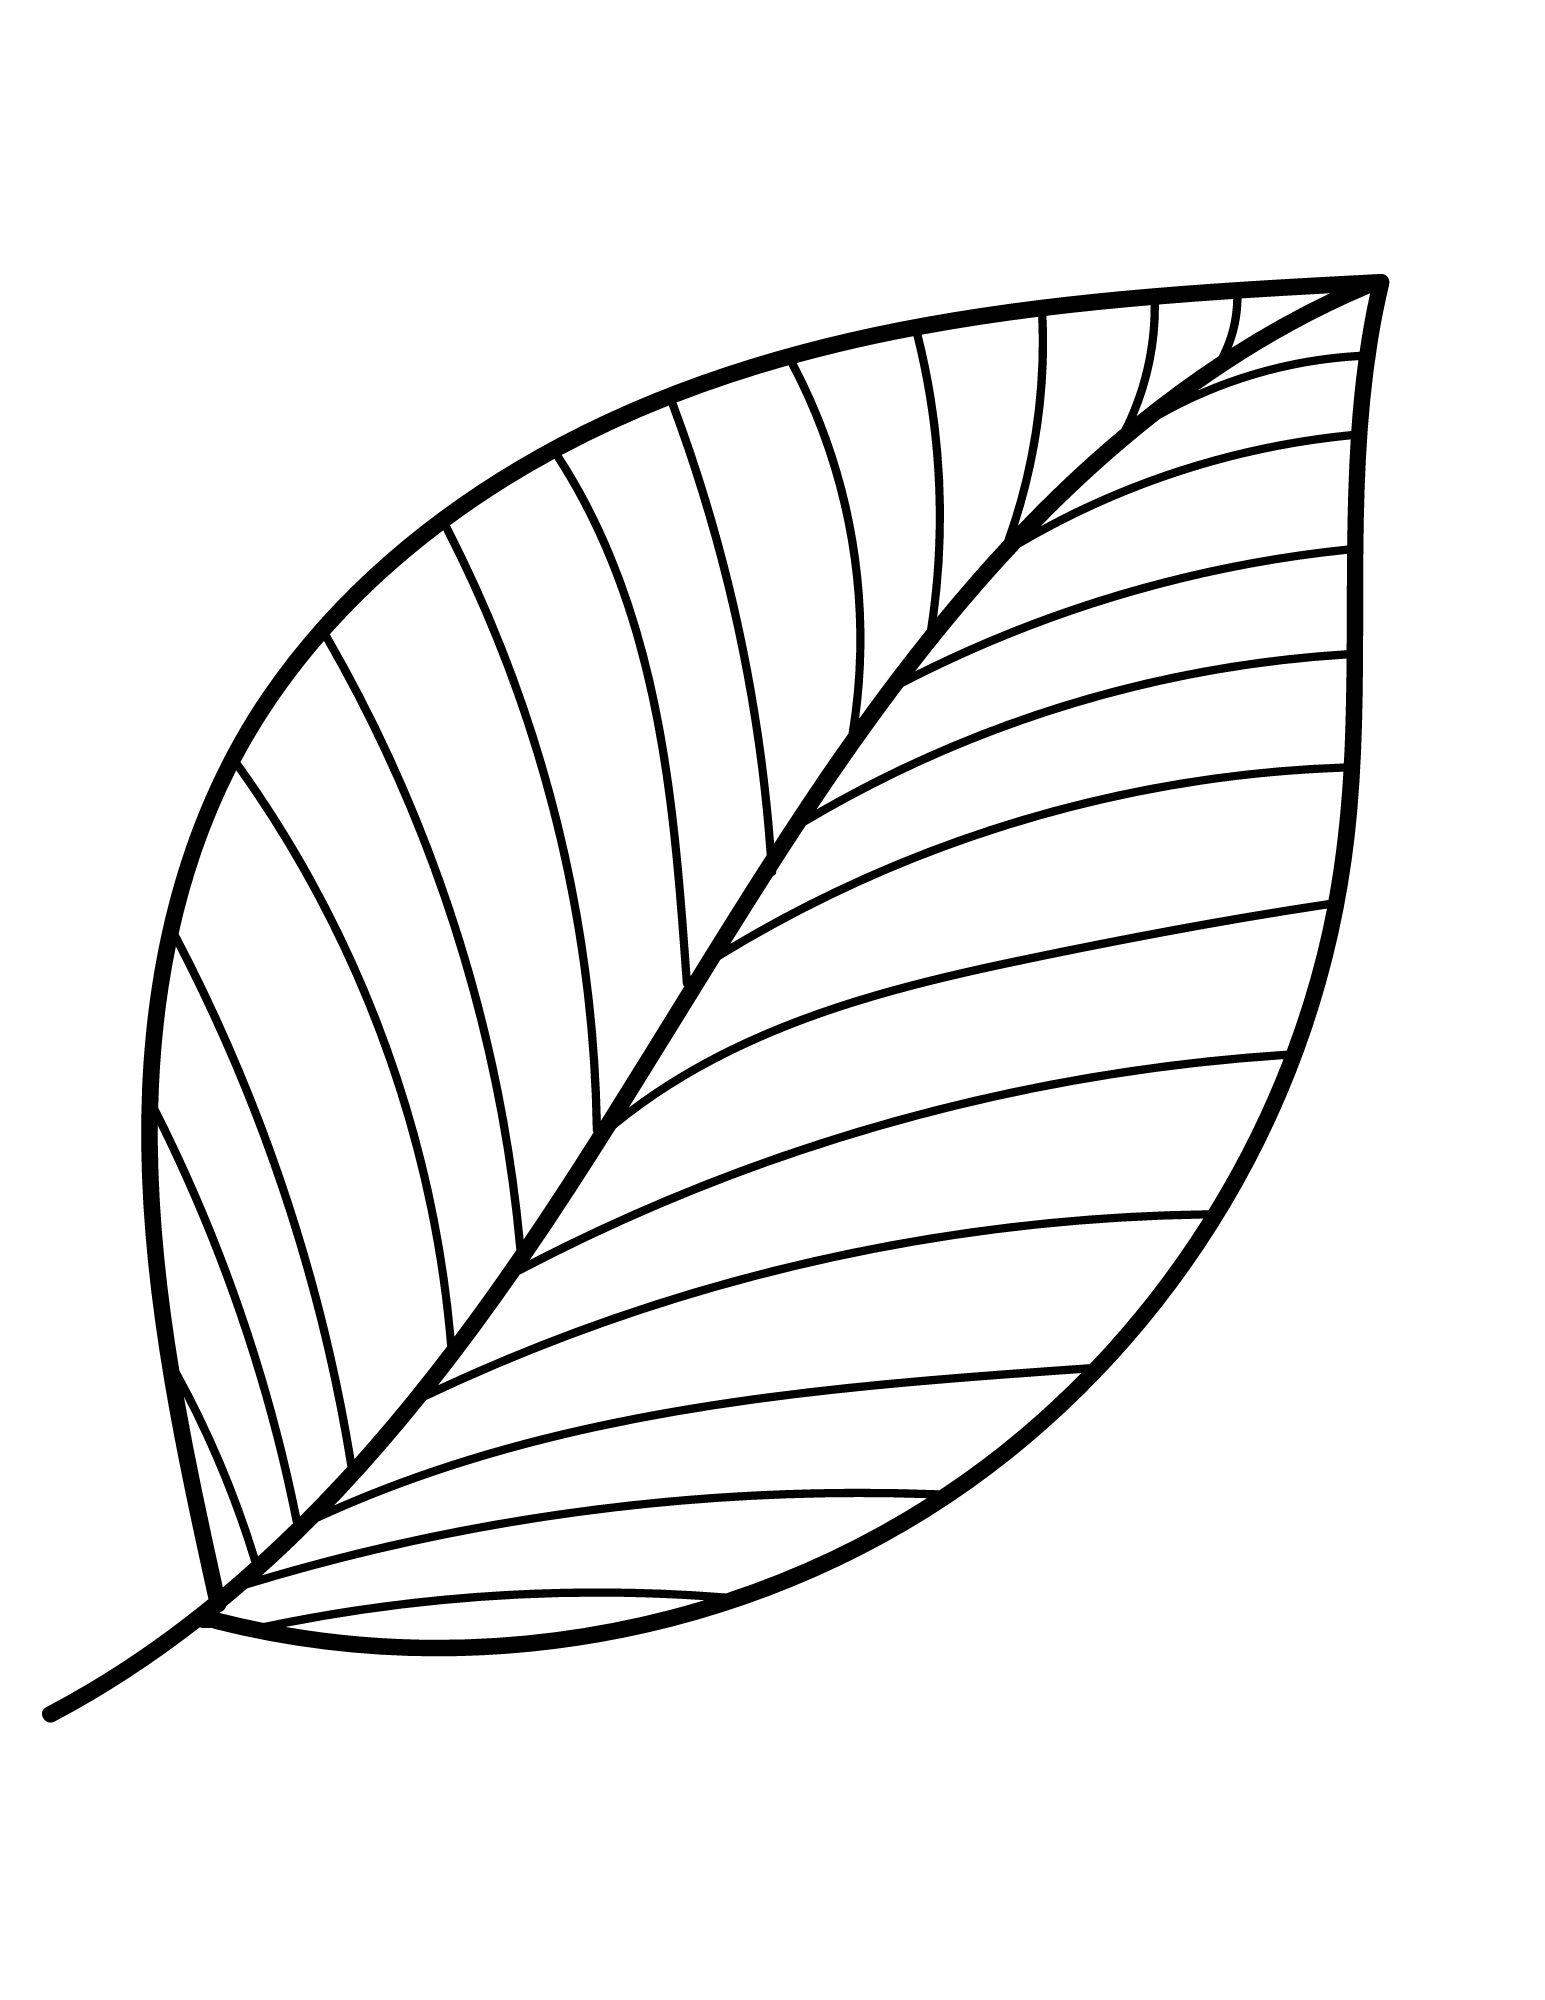 Free Leaf Templates & Outlines: Tons of Printables!!